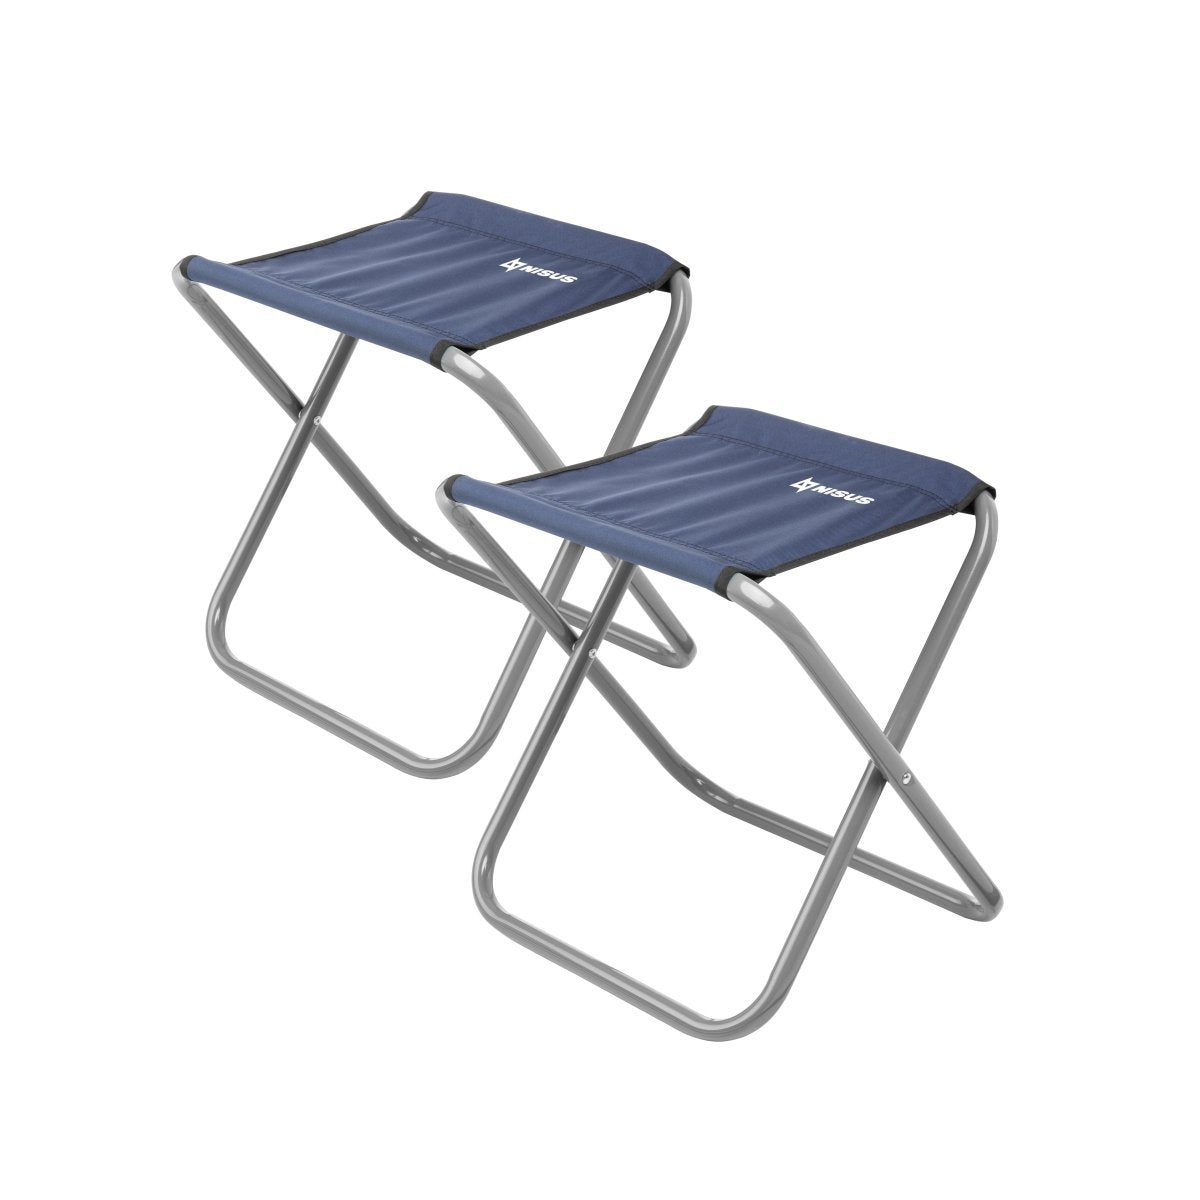 Set of 2 Blue Folding Camping Chairs with Steel Frame